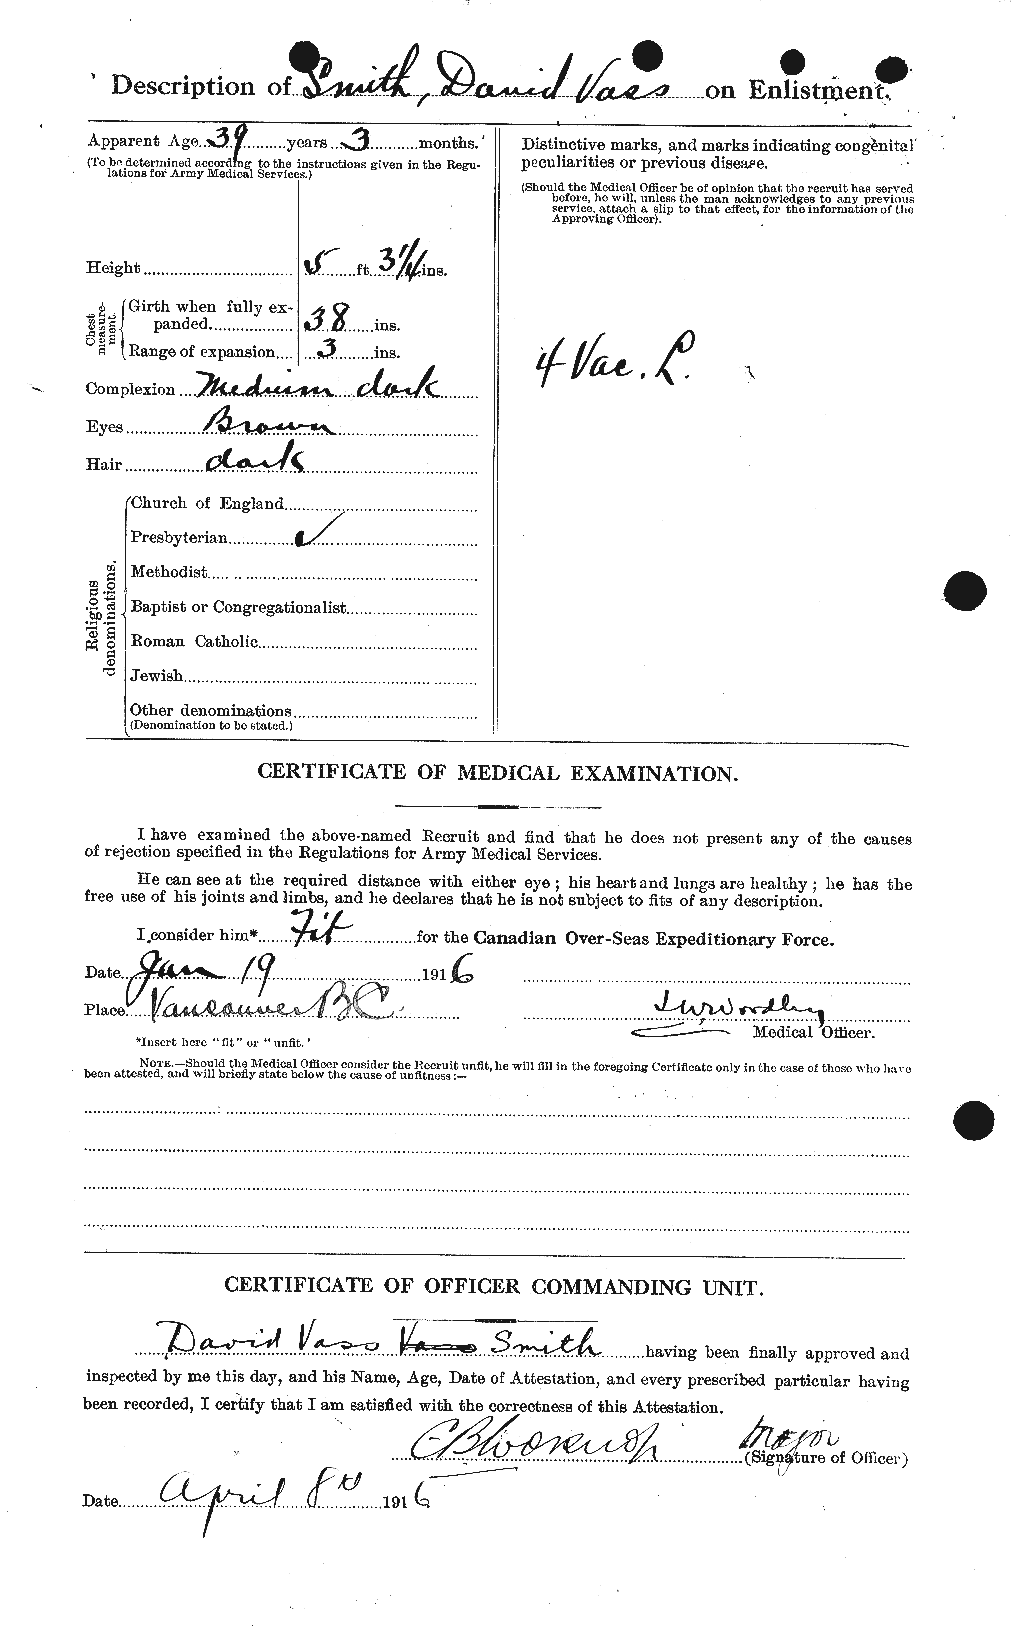 Personnel Records of the First World War - CEF 102042b